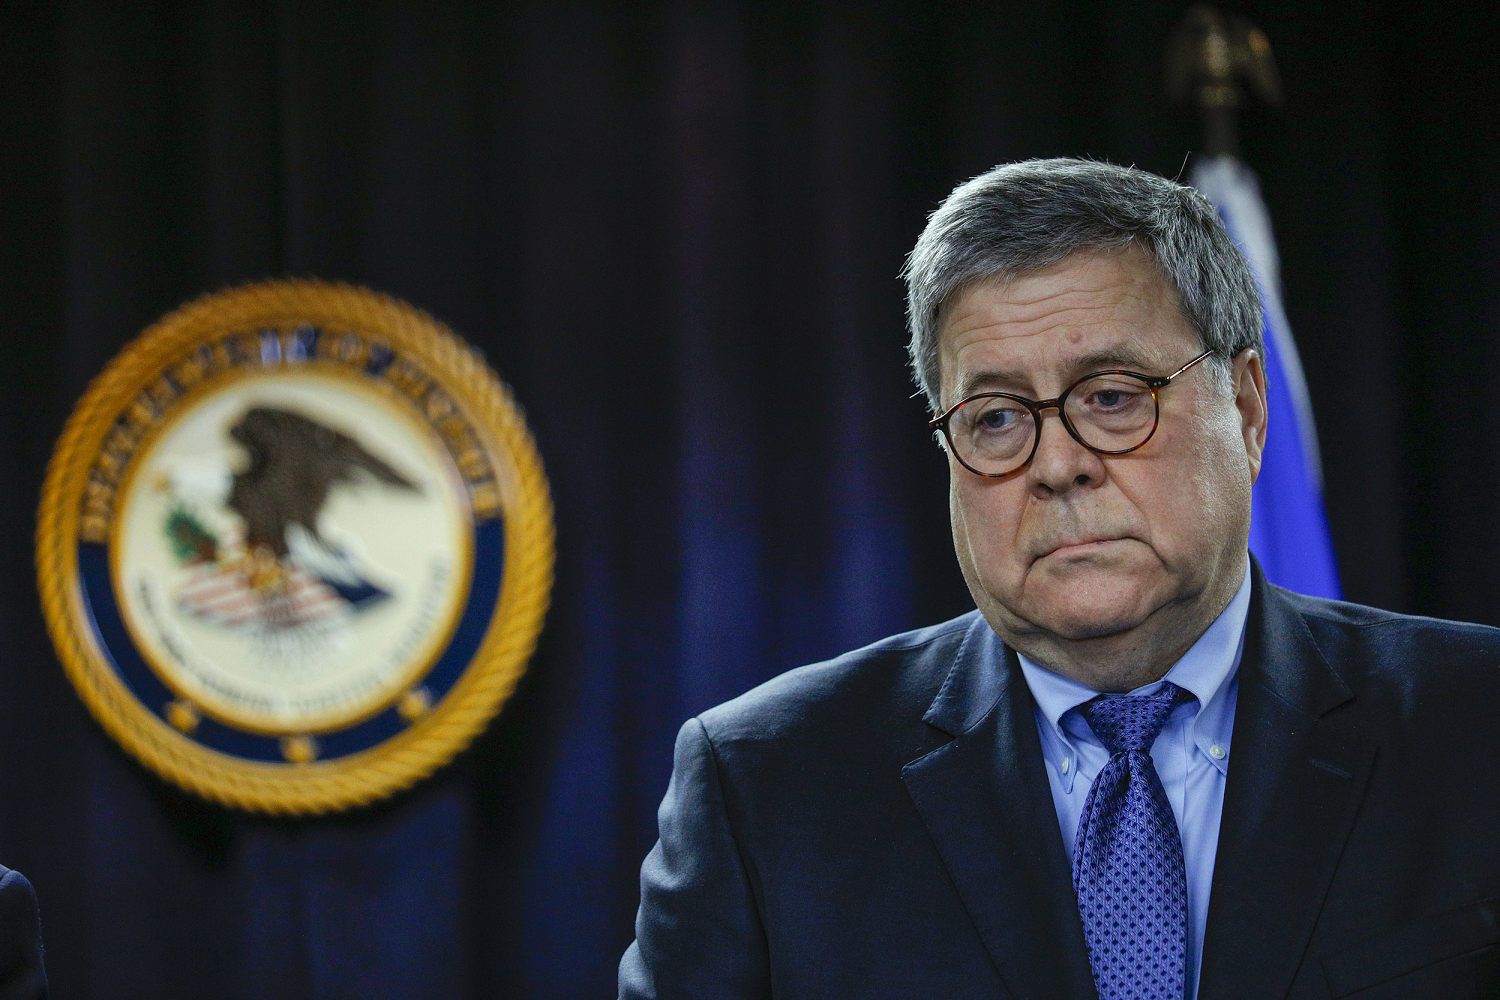 Watchdog slams ex-AG William Barr over 'chaotic' response to 2020 Black Lives Matter protests